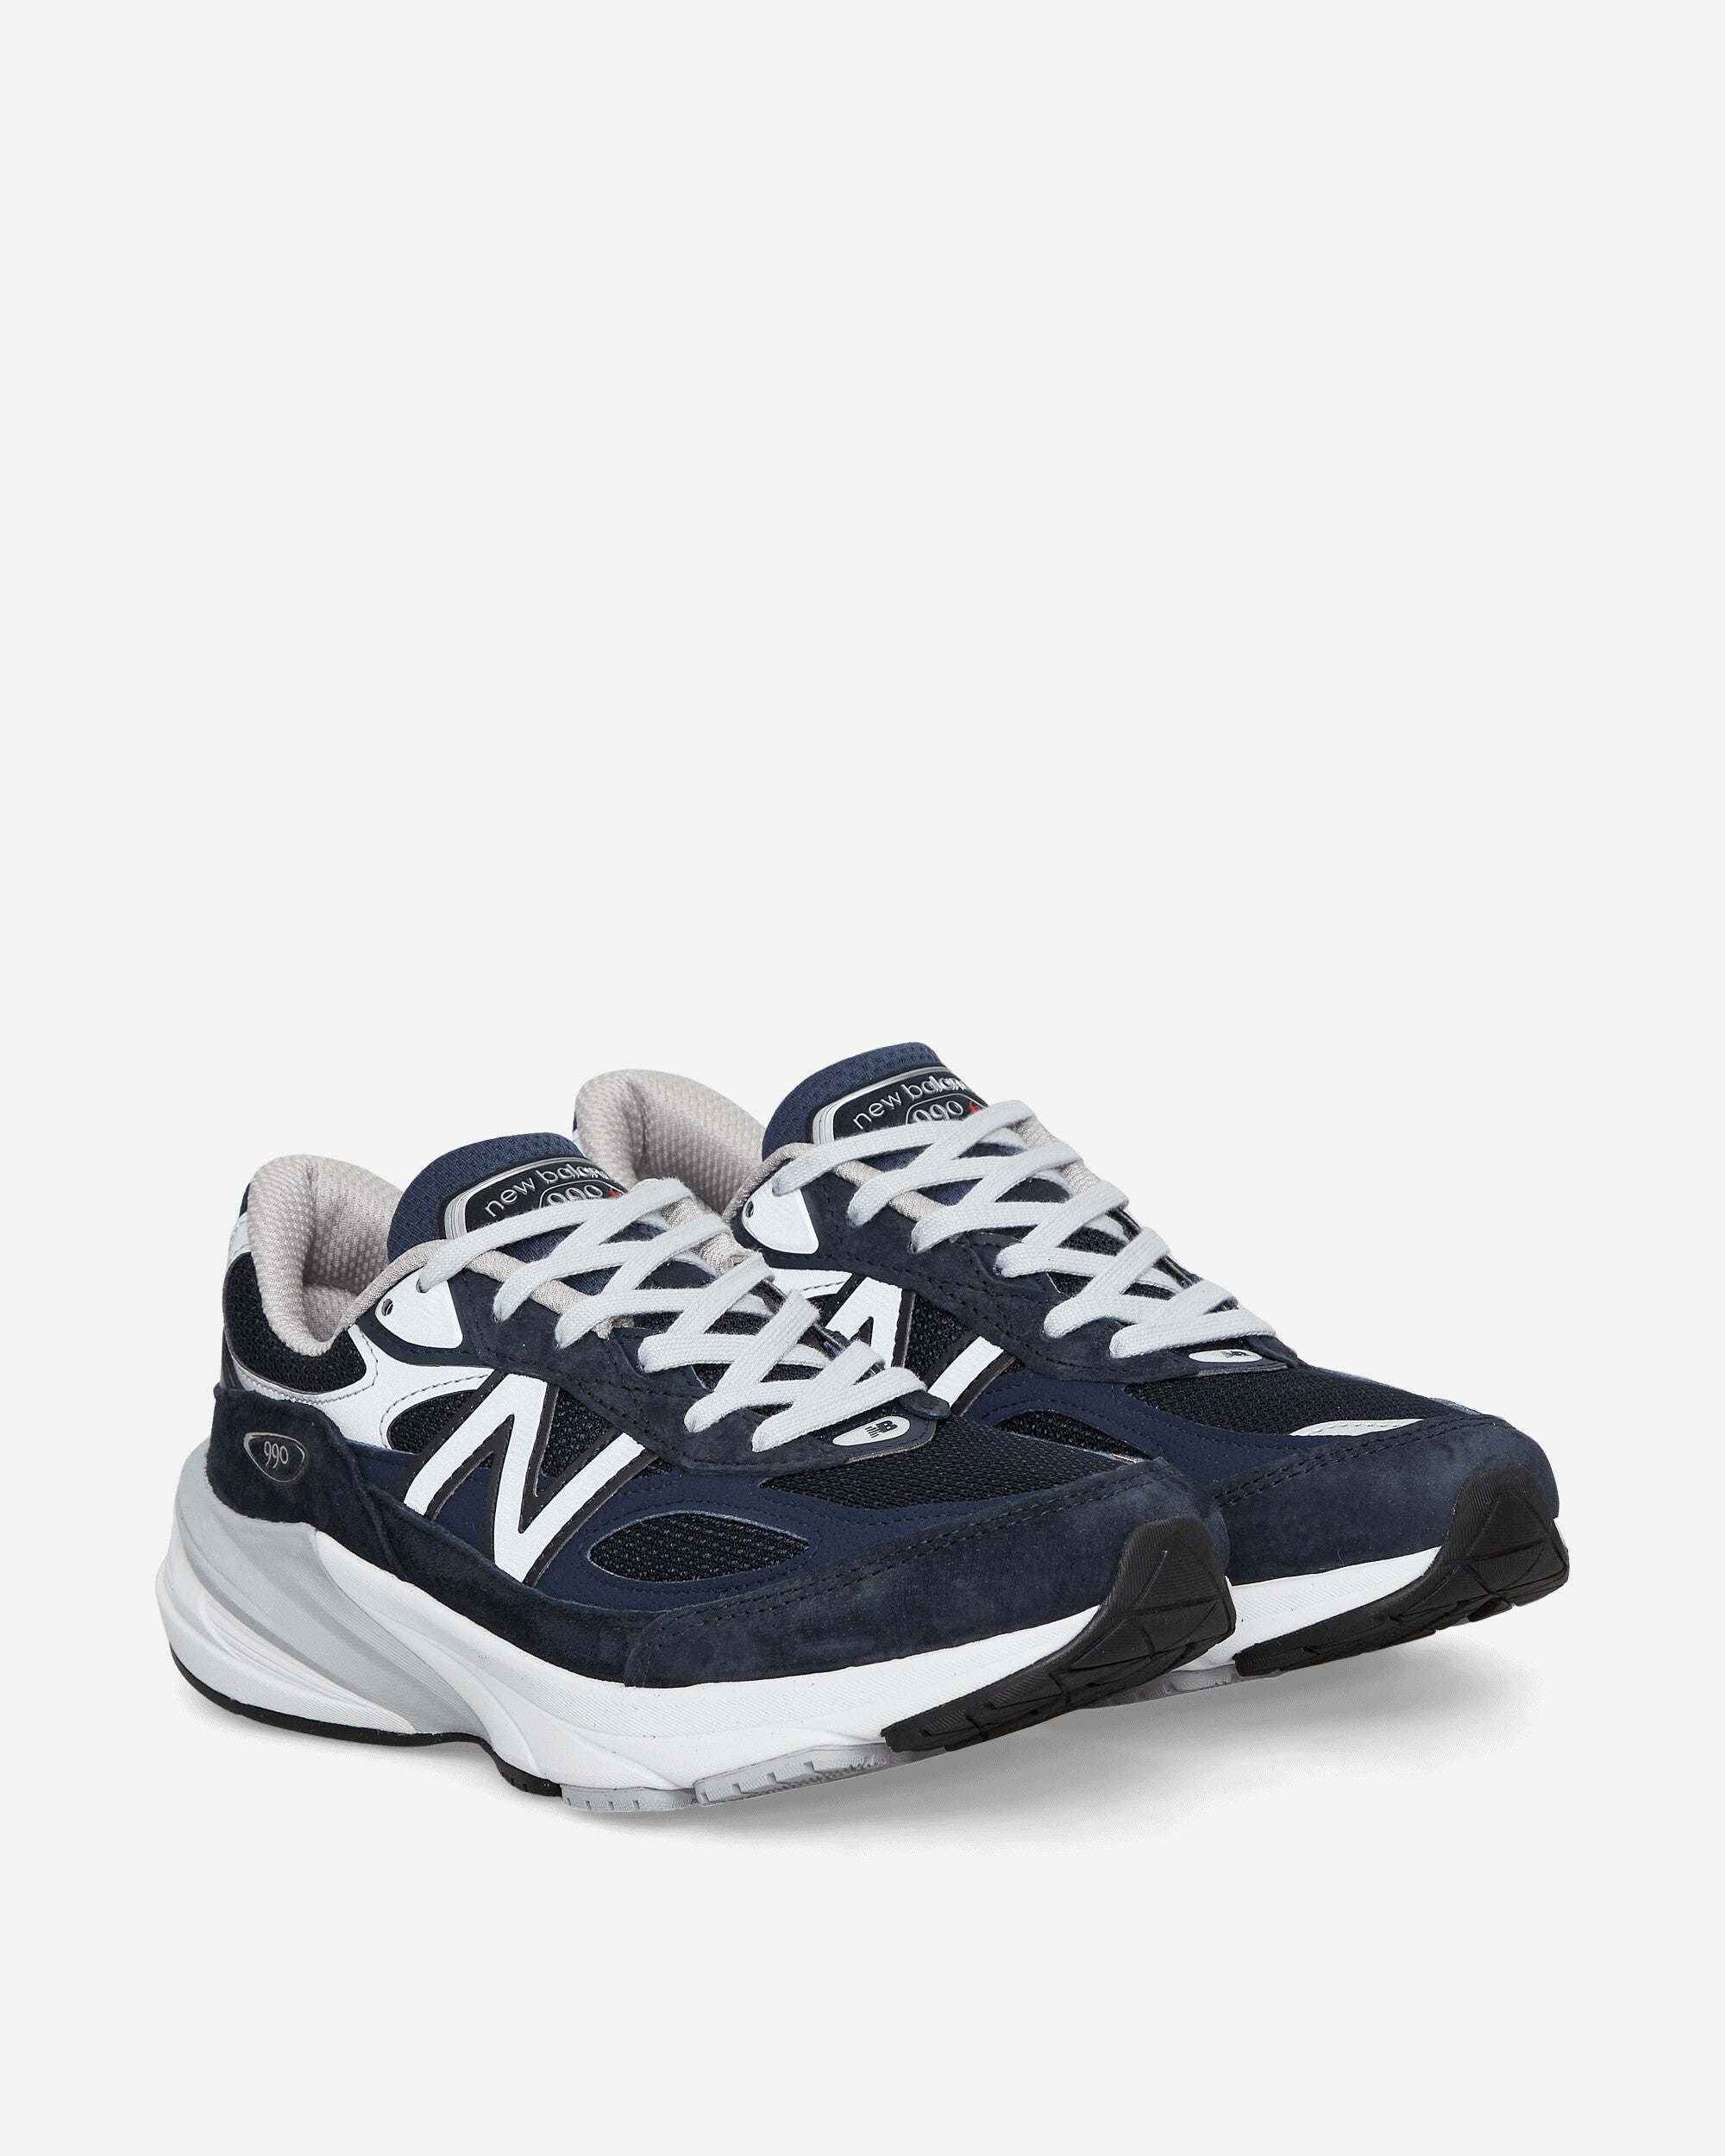 Made in USA 990v6 Sneakers Navy / White